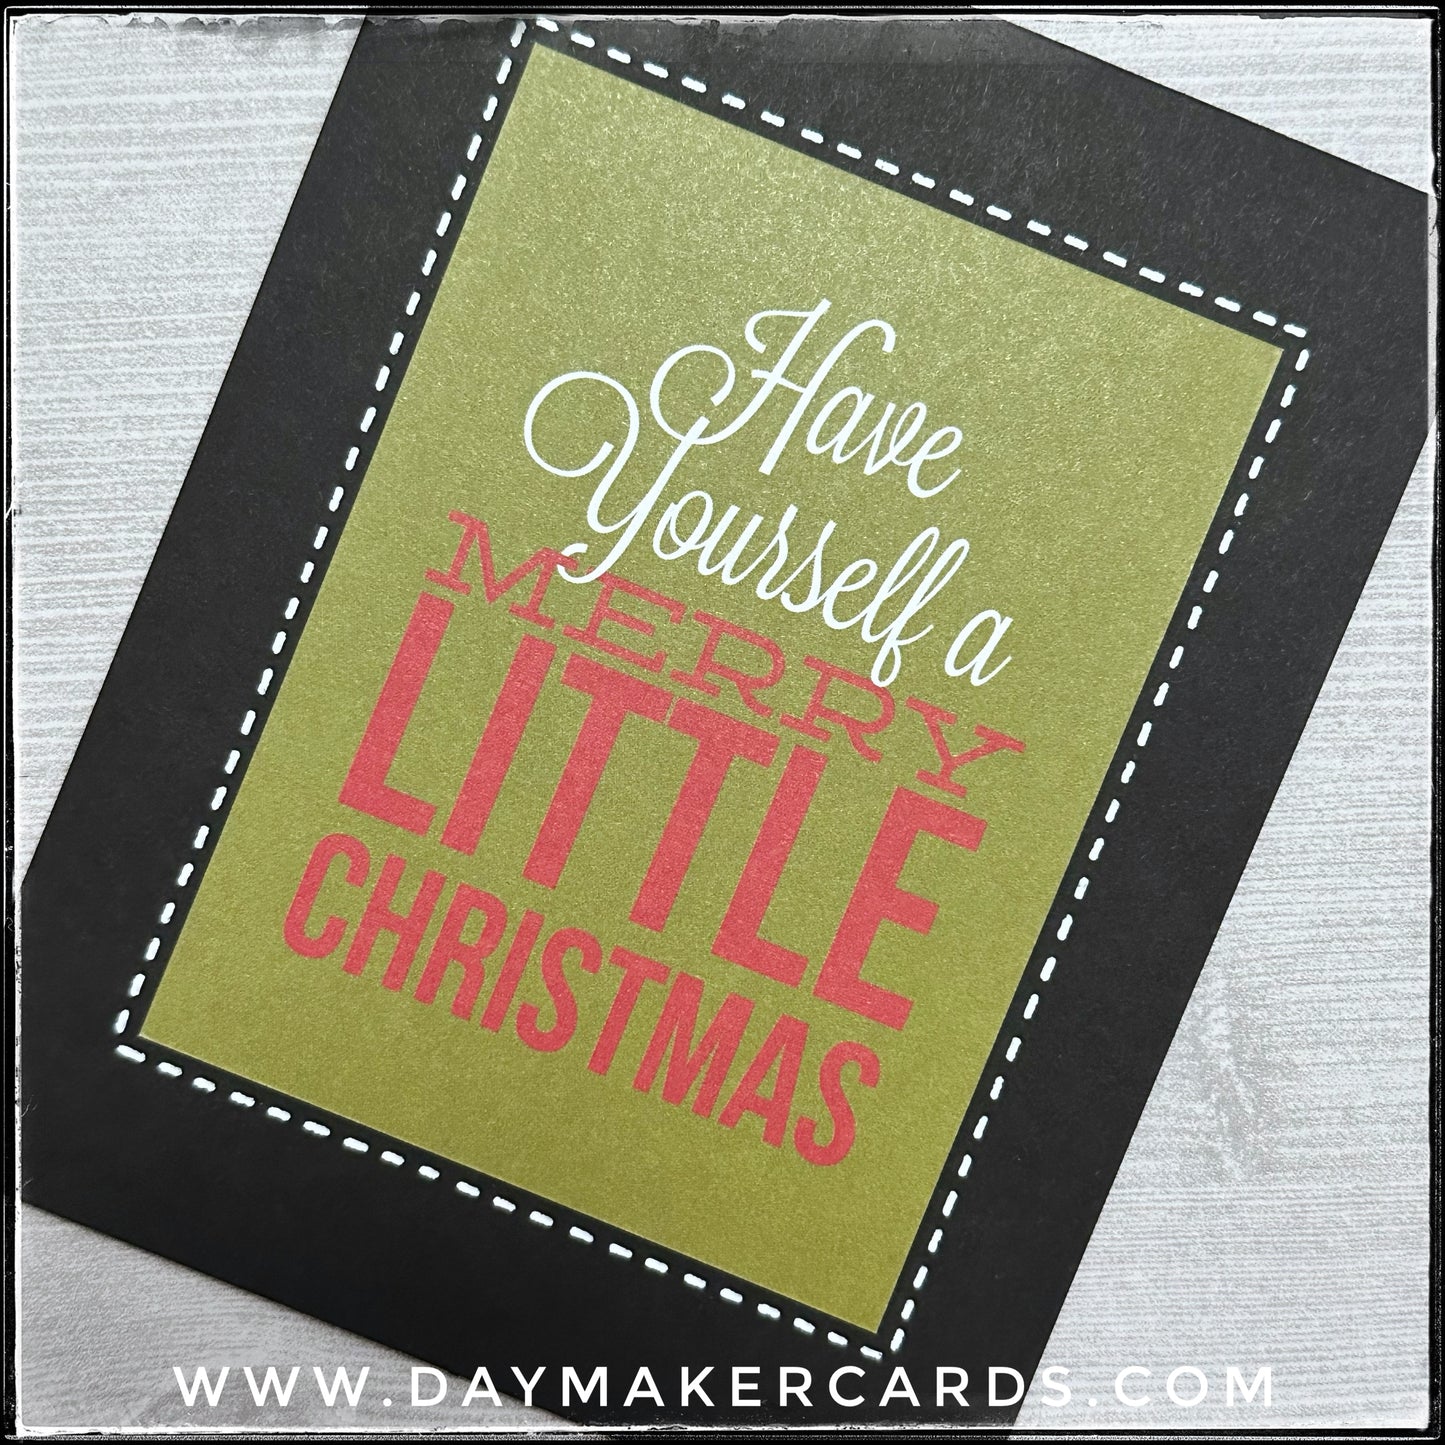 Have Yourself A Merry Little Christmas Handmade Card